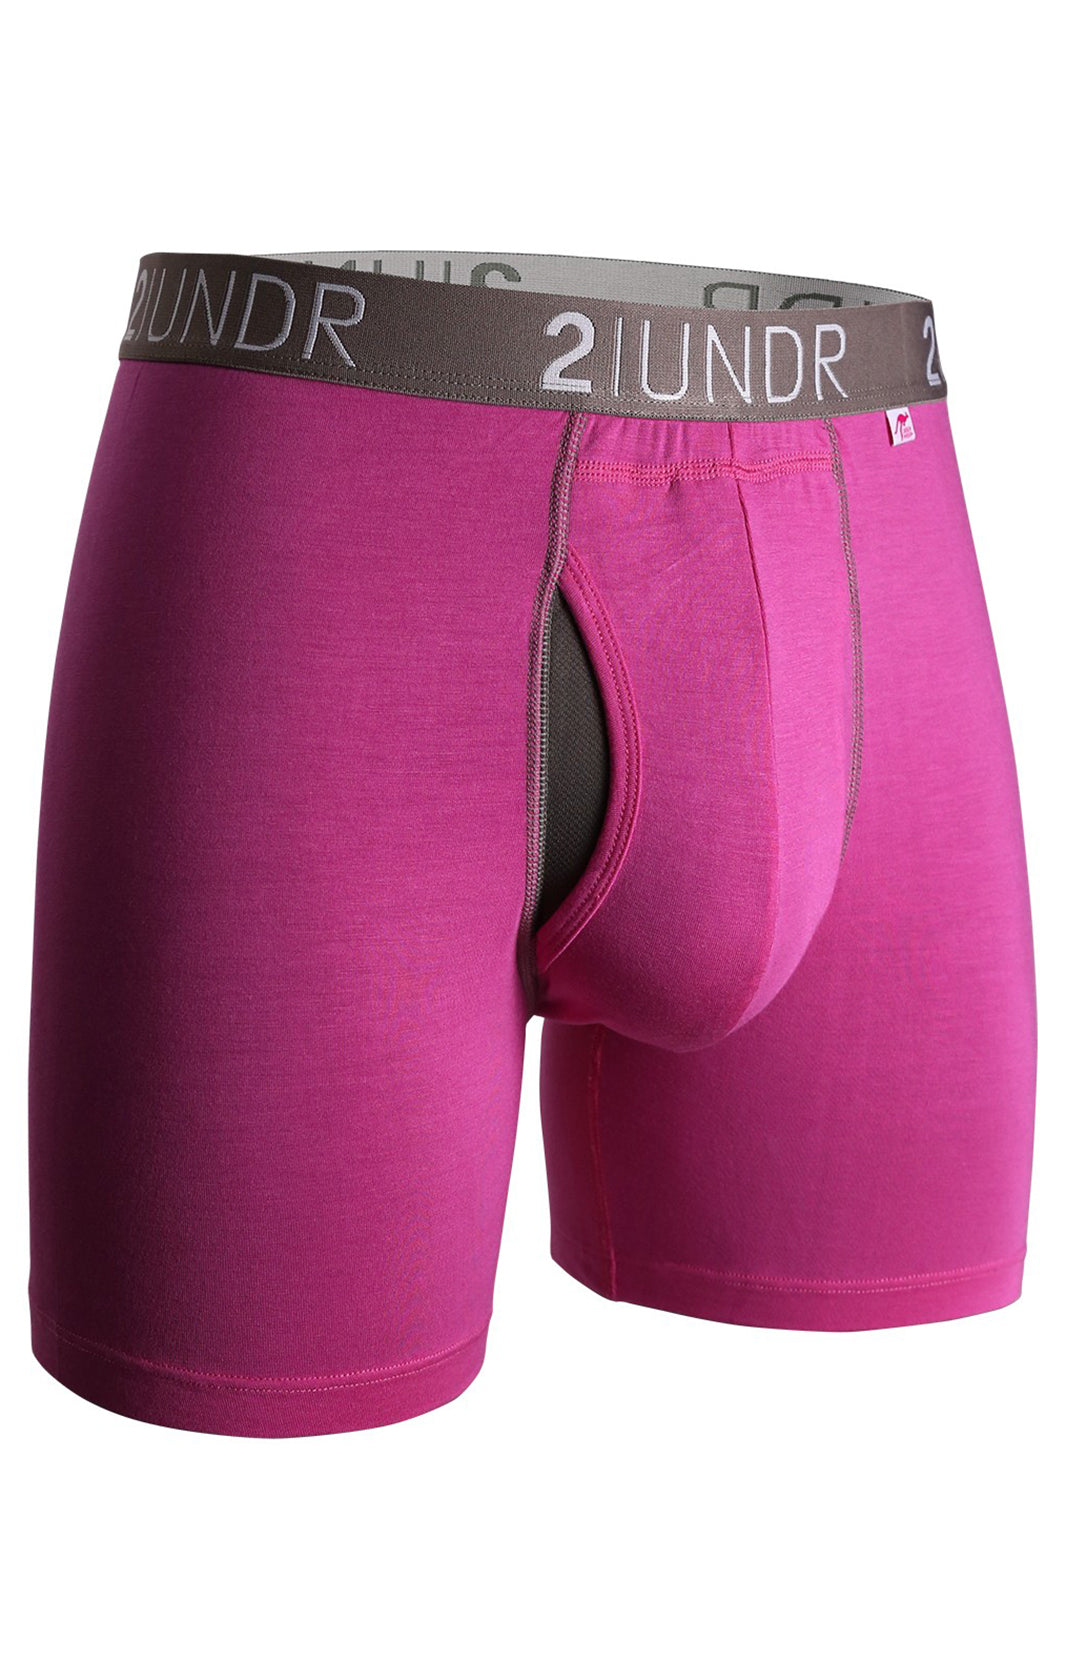 SWING SHIFT 6" BOXER BRIEF - PINK